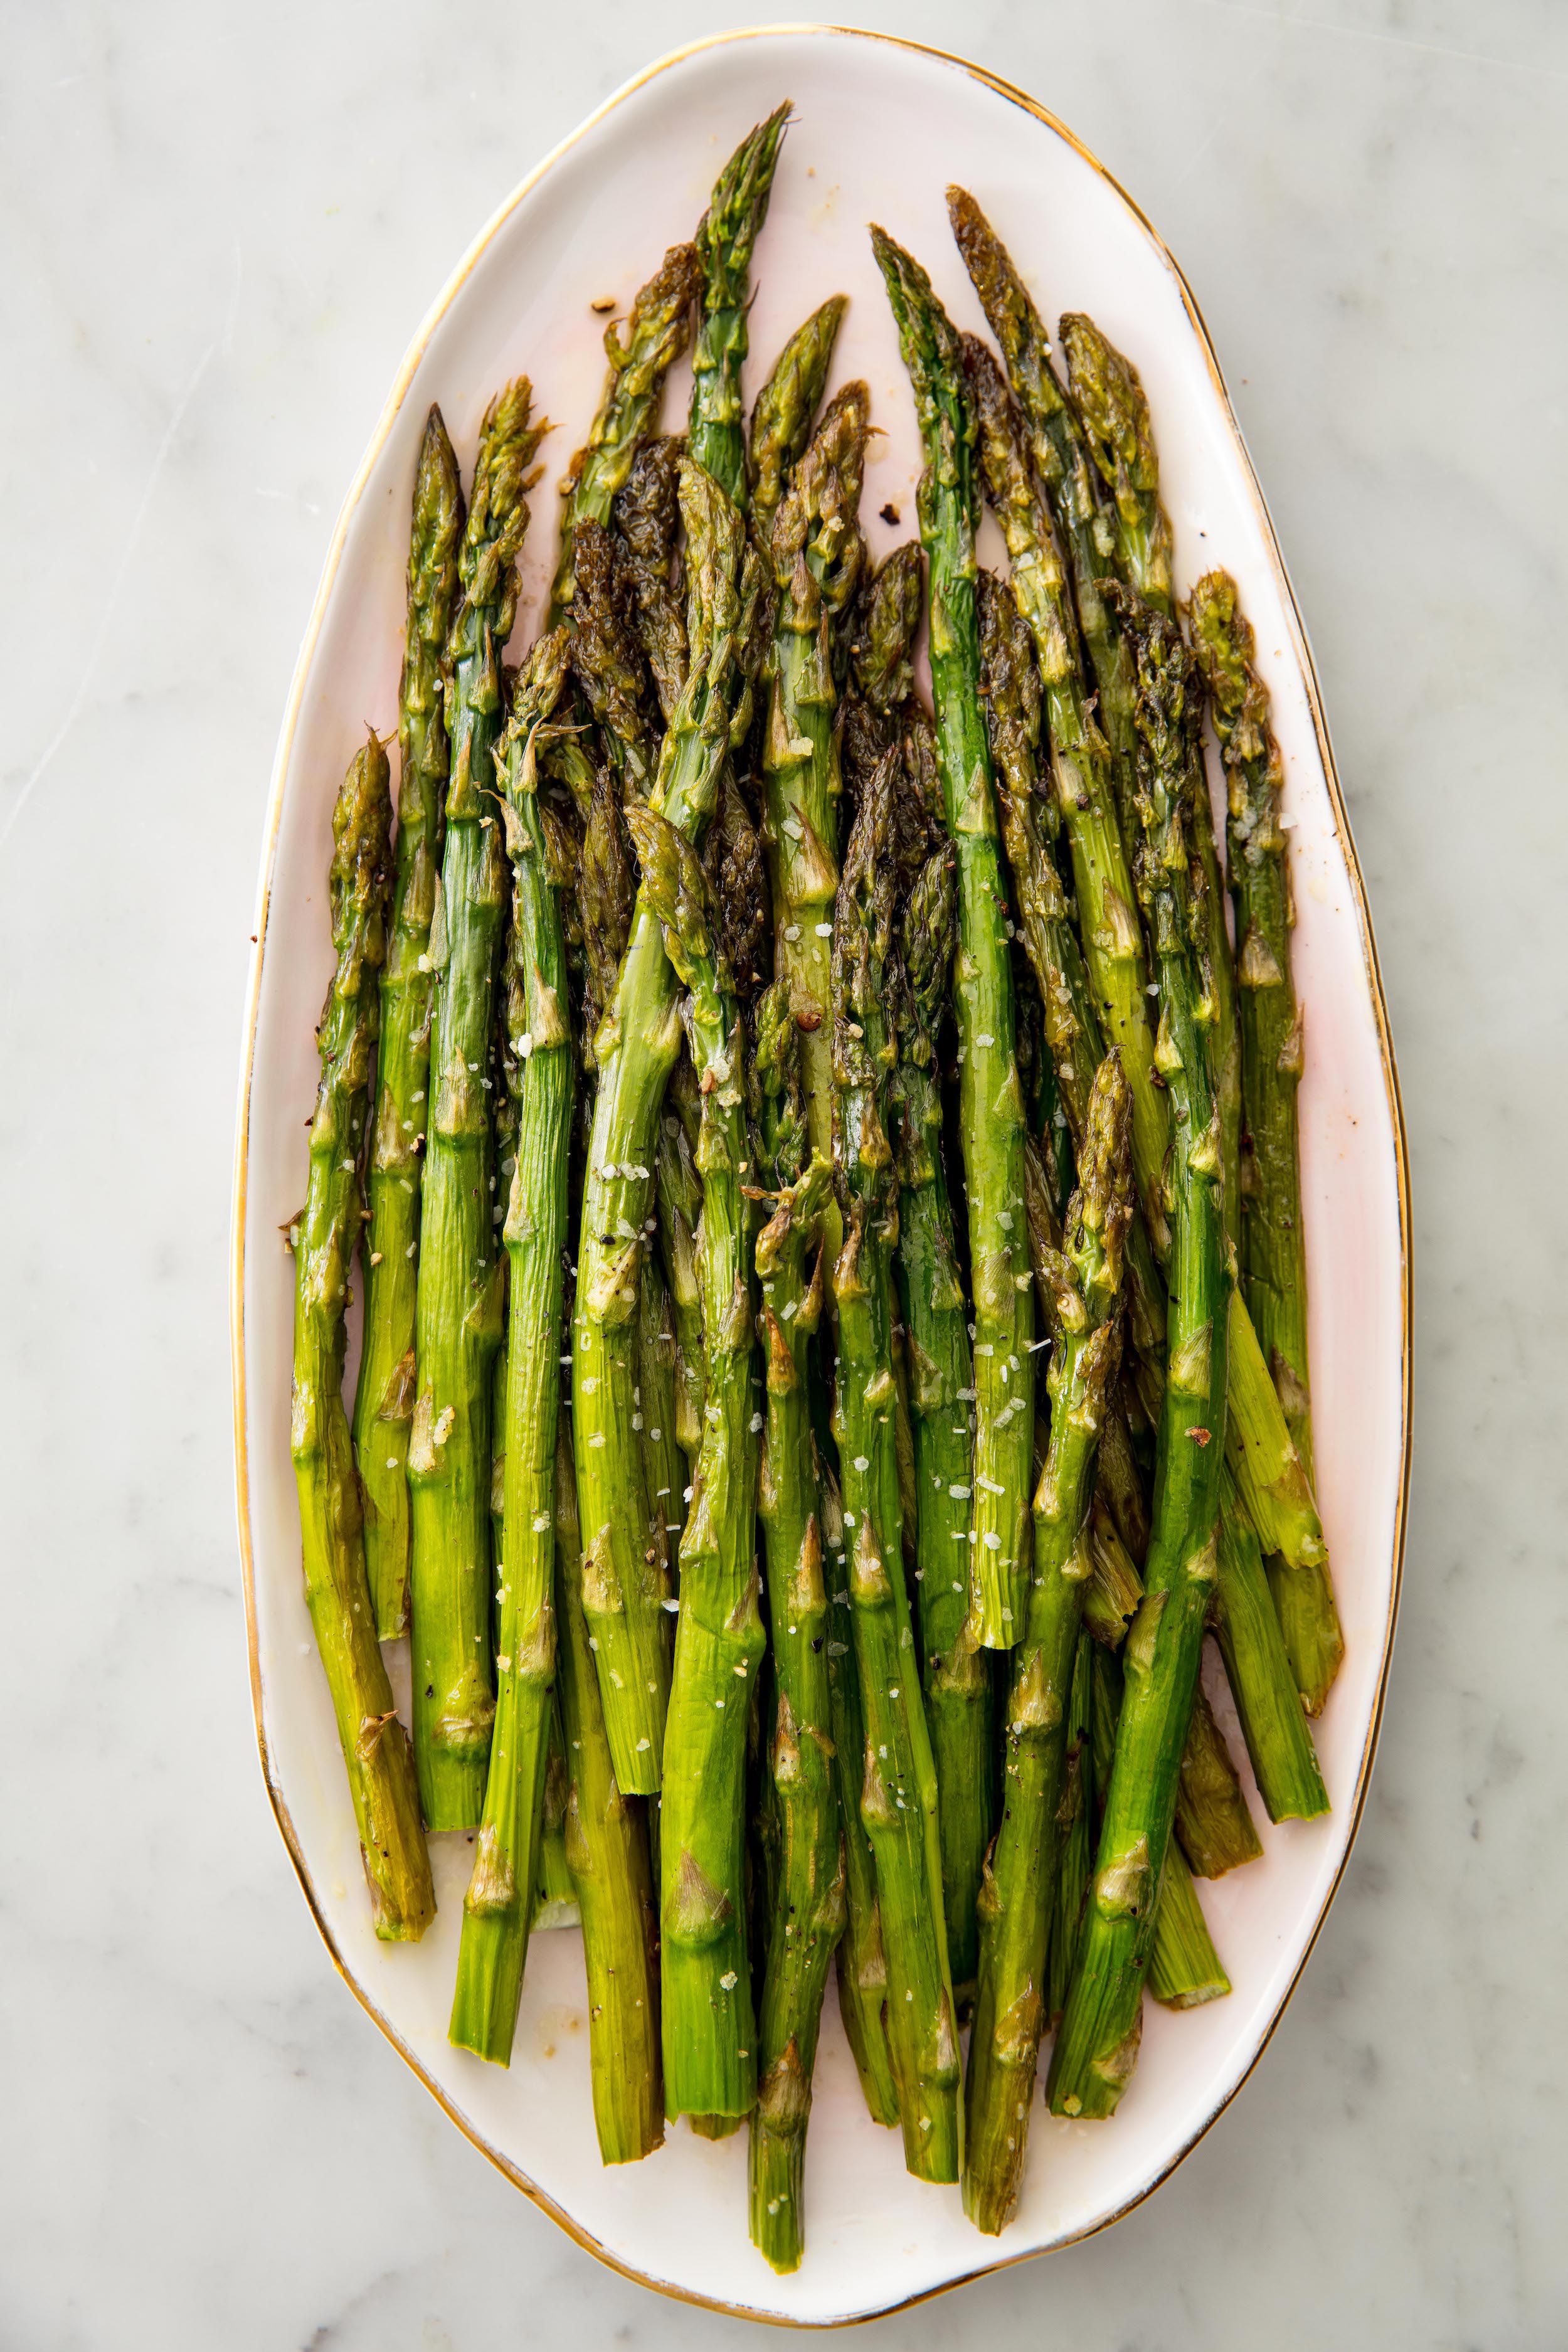 17 Best Oven Roasted Asparagus Recipes - How to Bake or Roast ...